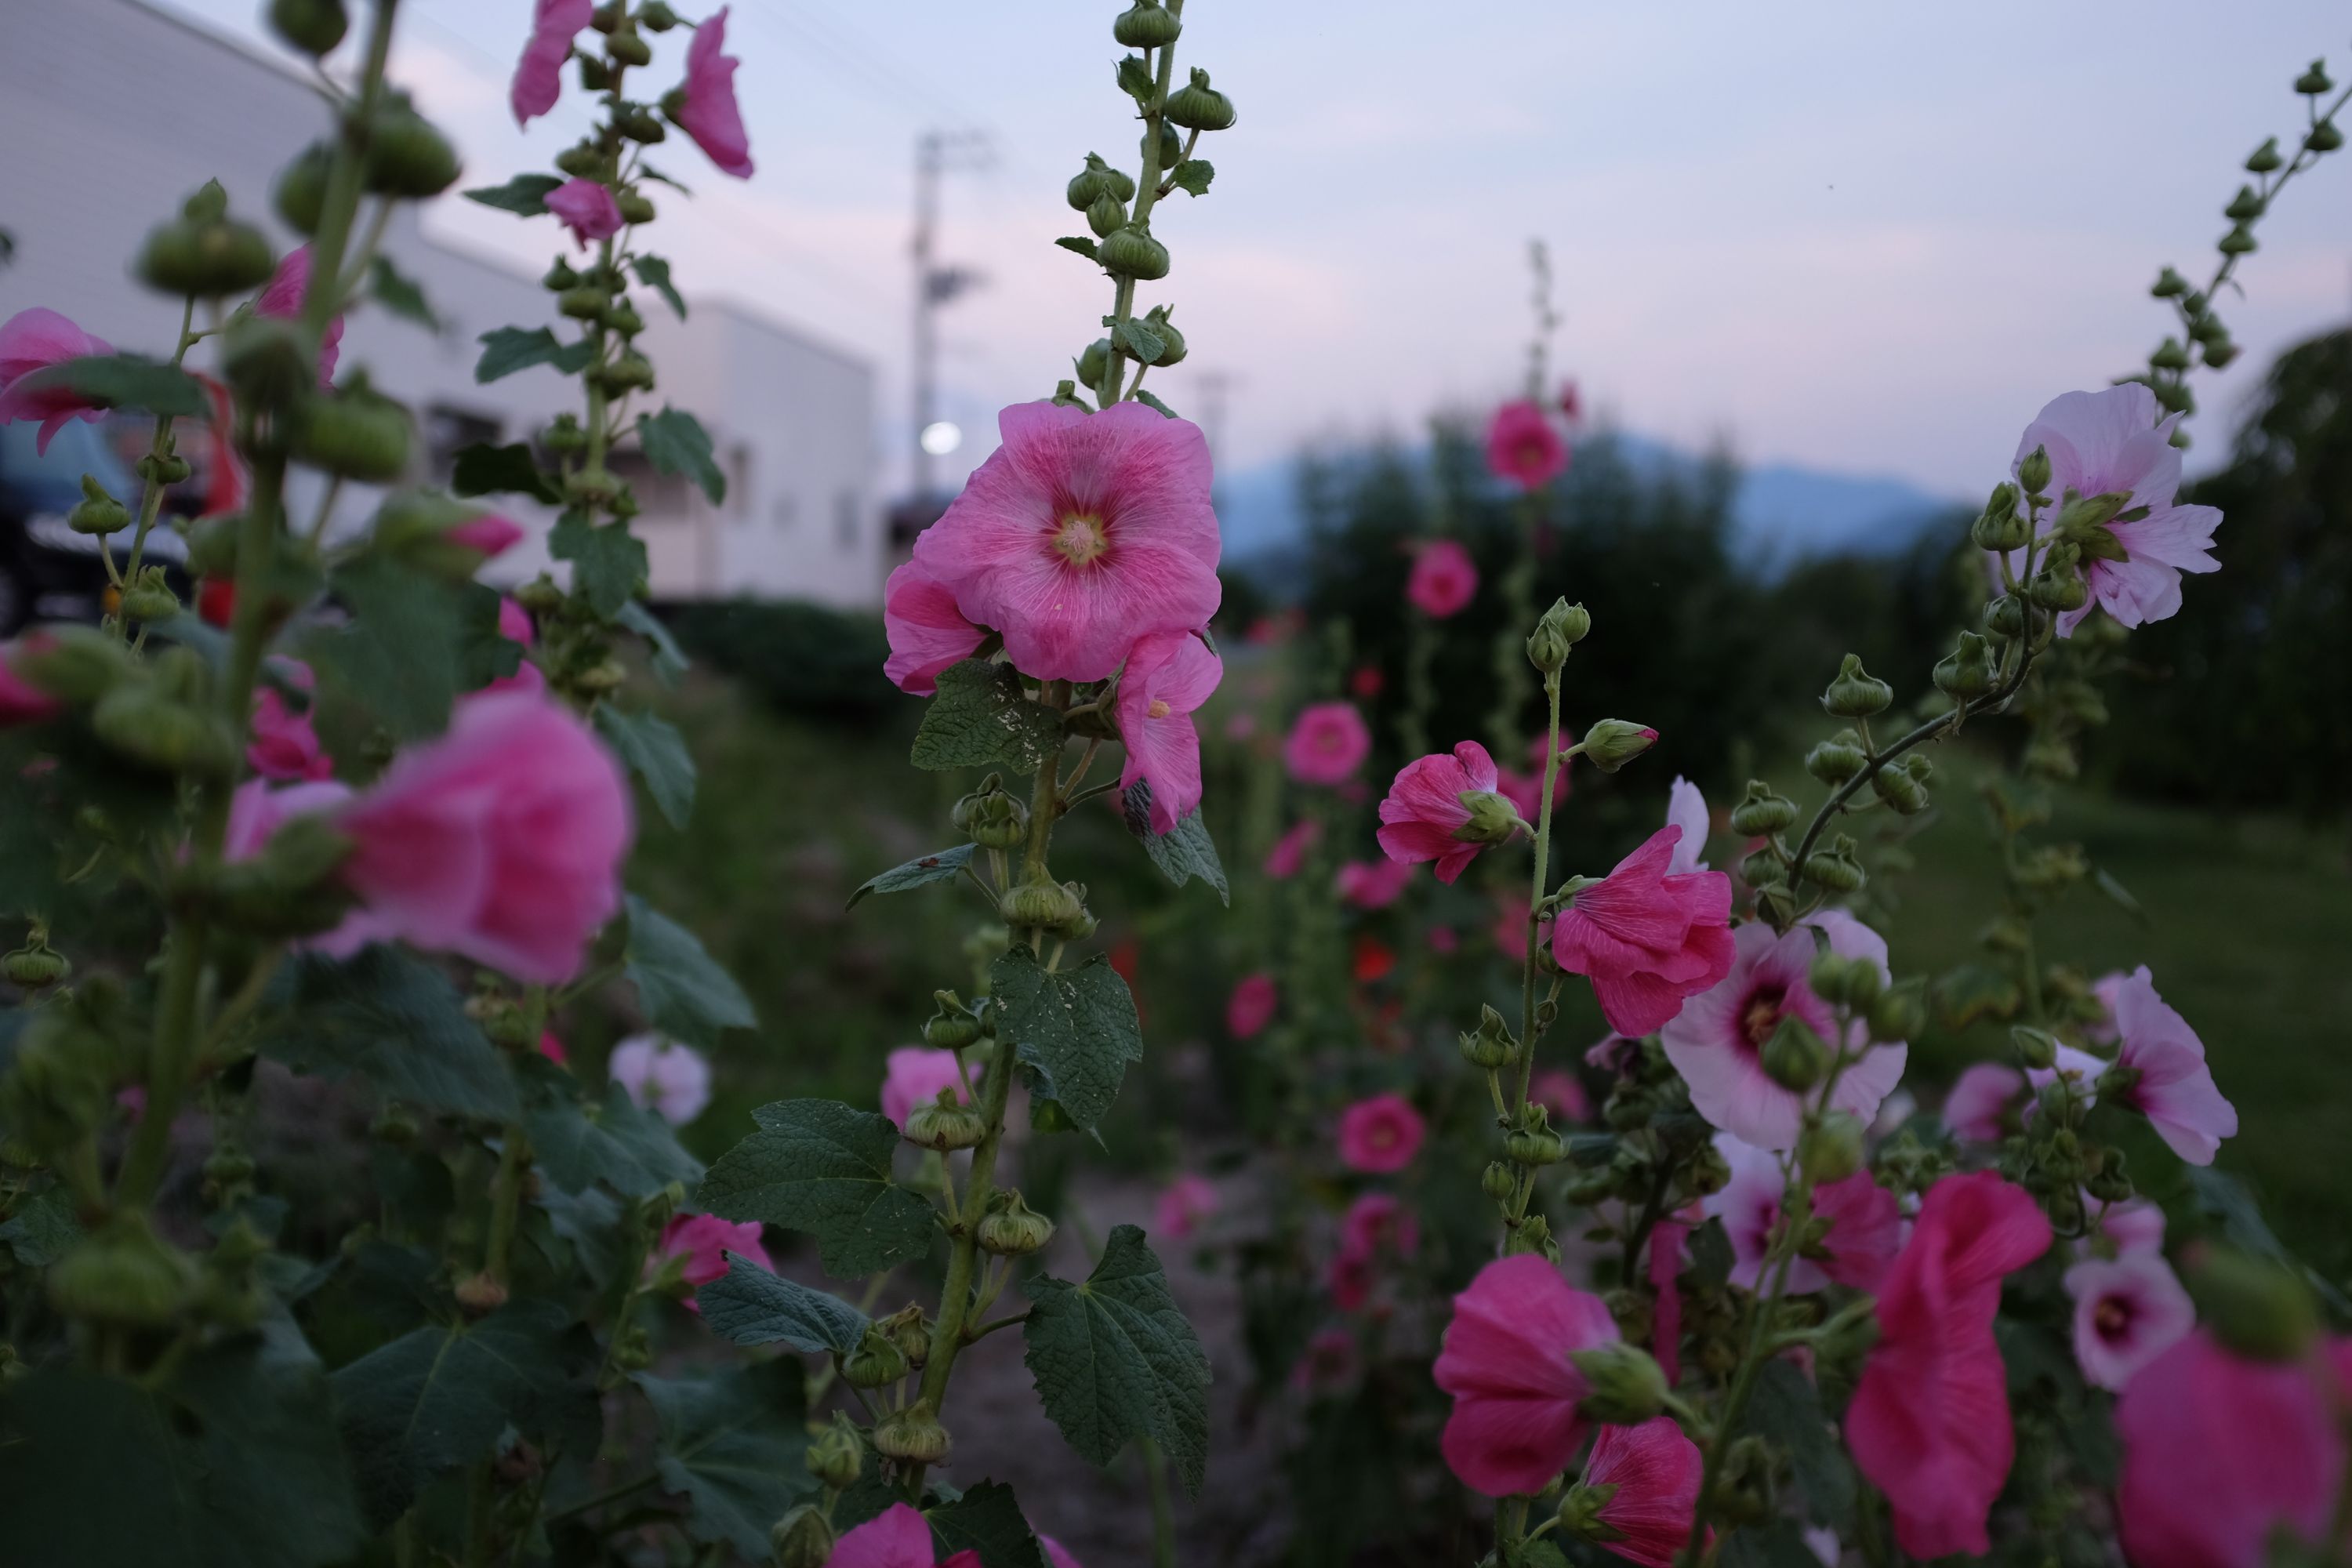 Heads of pink mallow in the evening light.